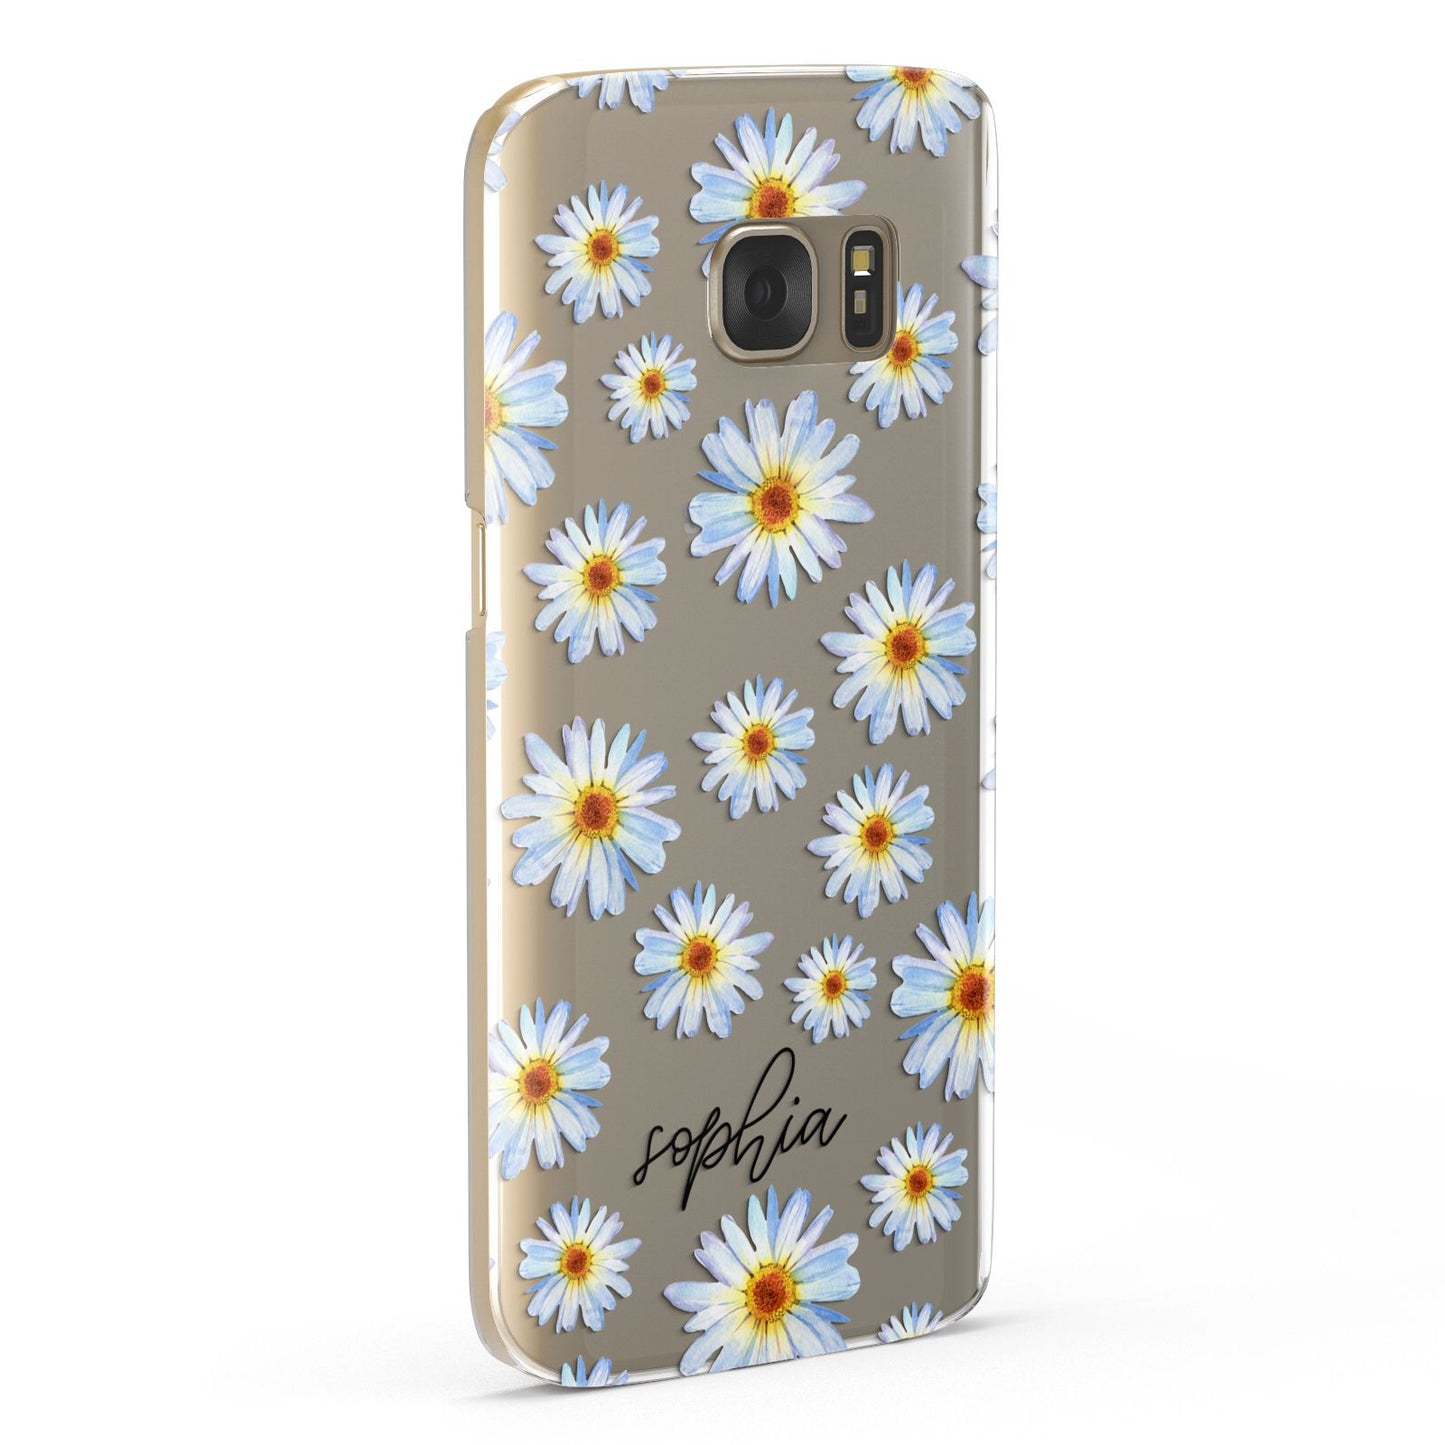 Personalised Daisy Samsung Galaxy Case Fourty Five Degrees